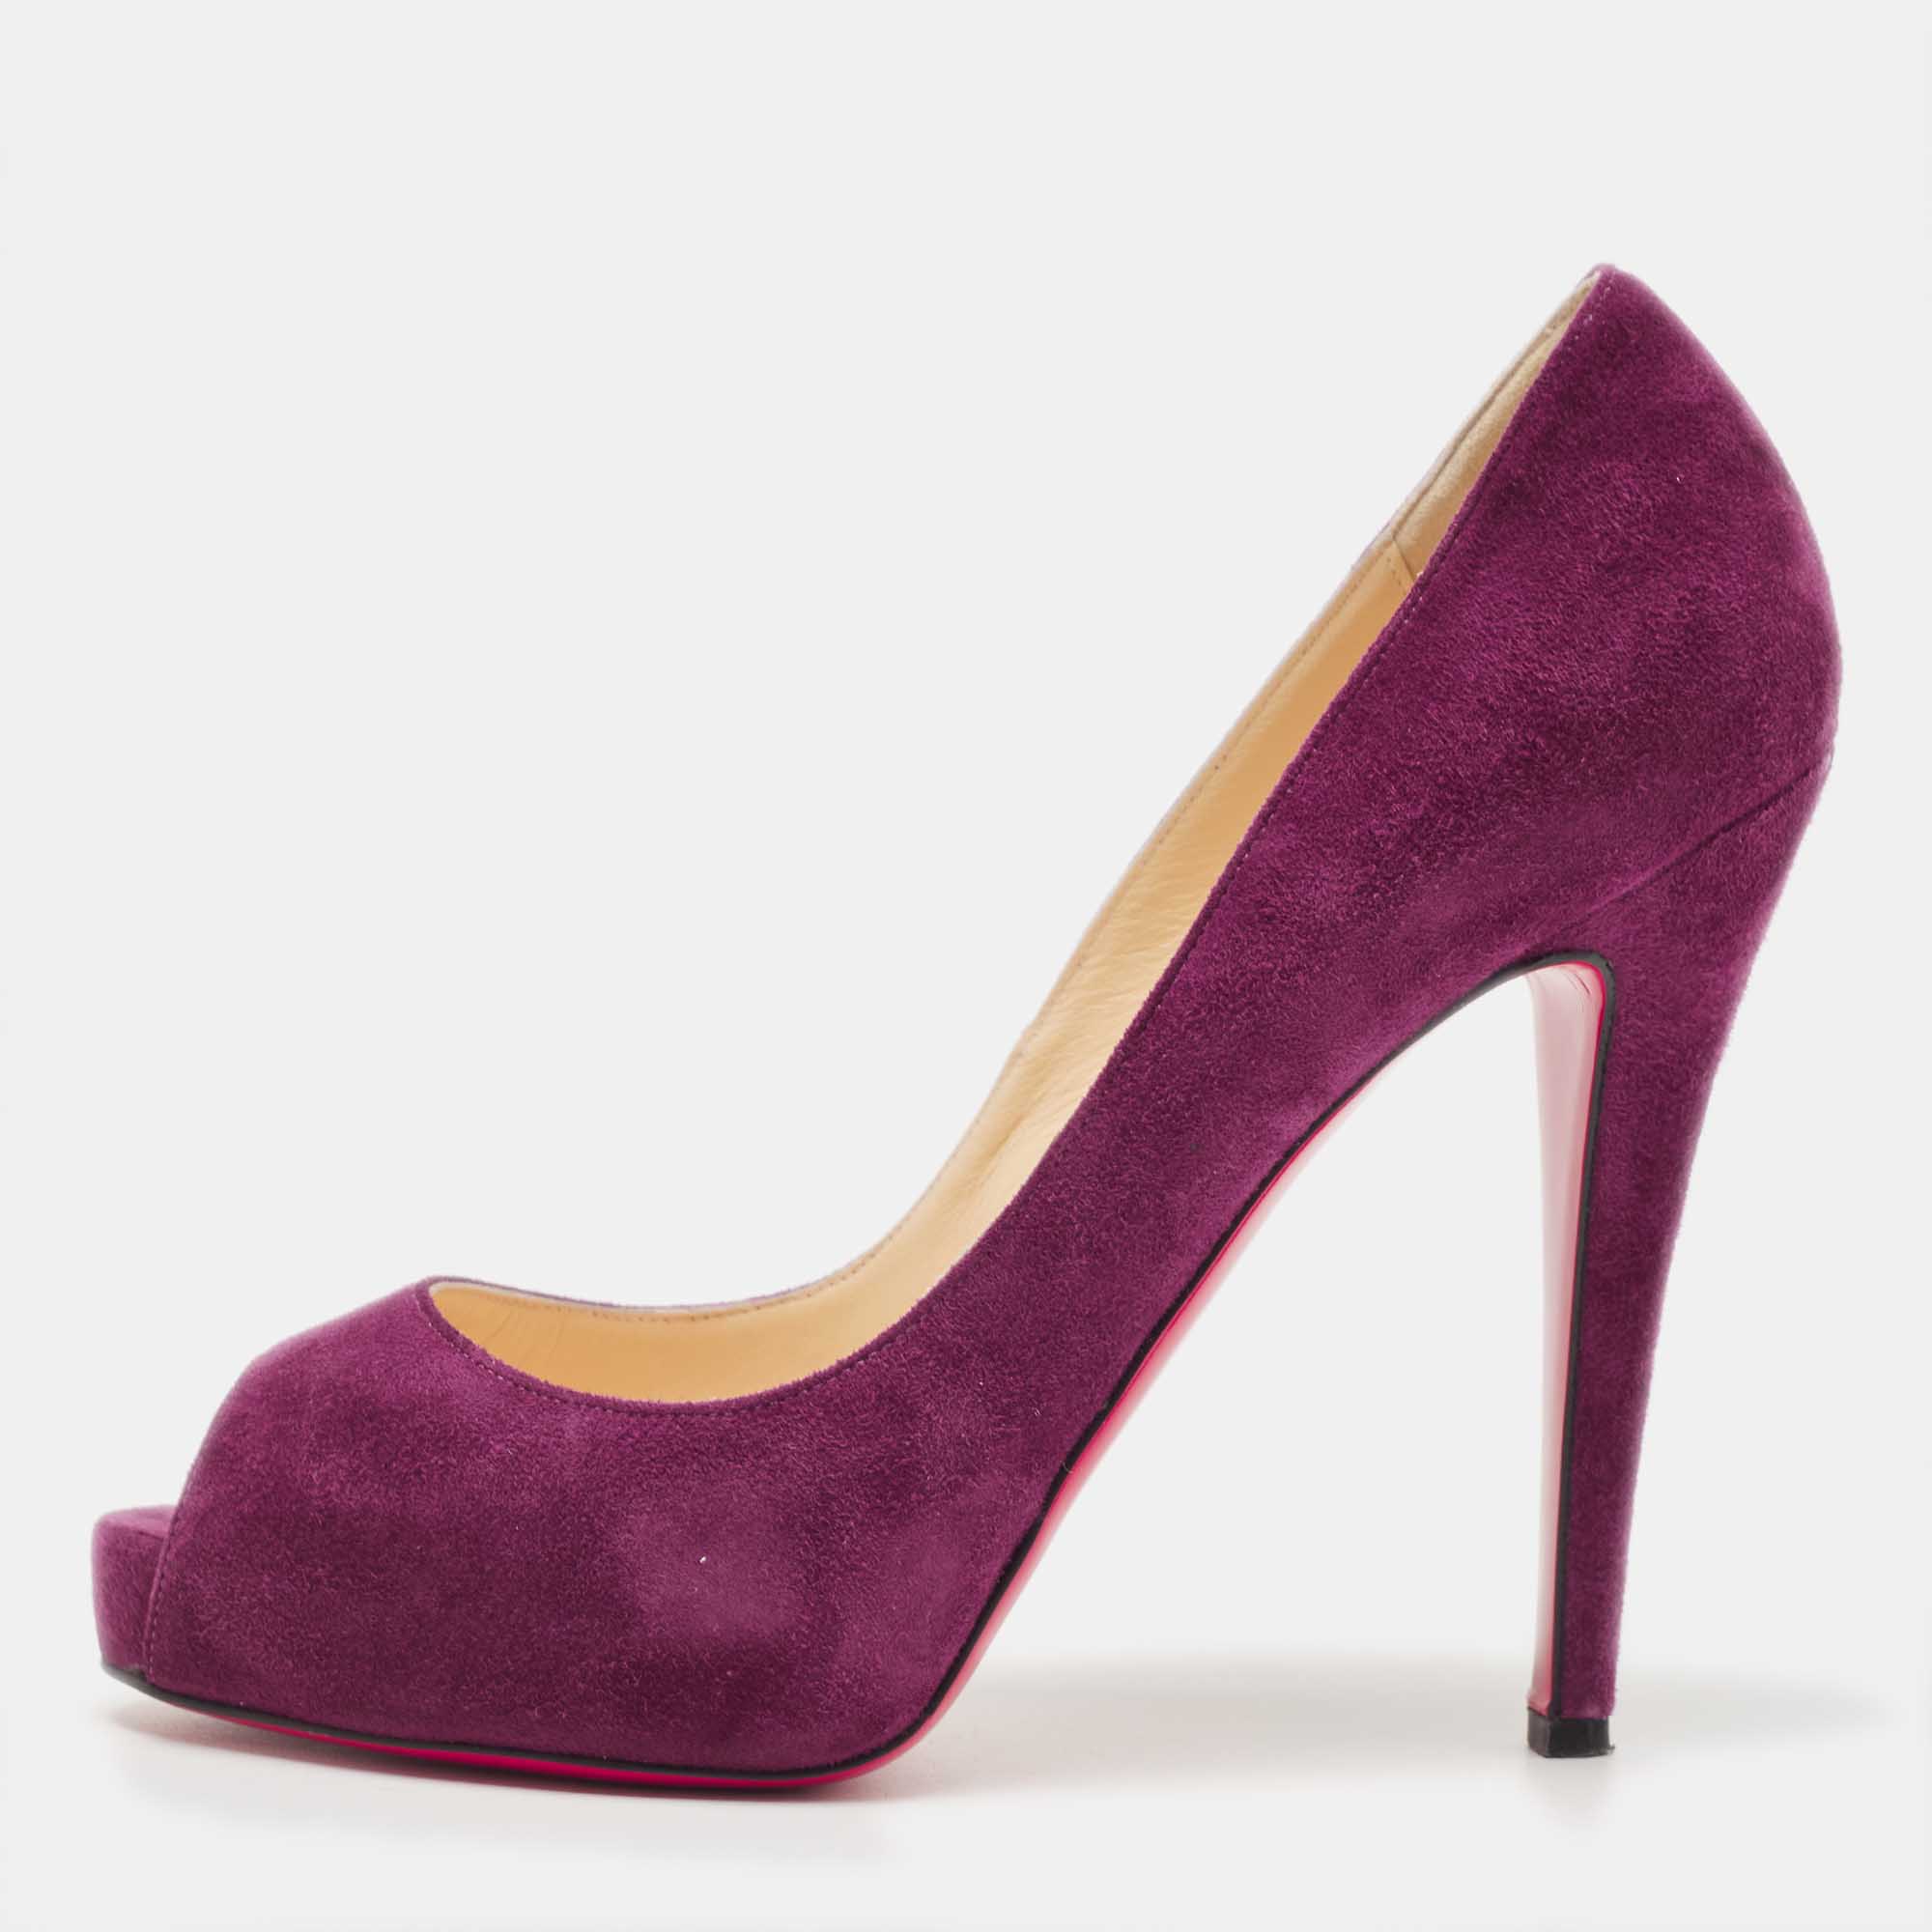 Pre-owned Christian Louboutin Purple Suede Very Prive Platform Peep Toe Pumps Size 37.5